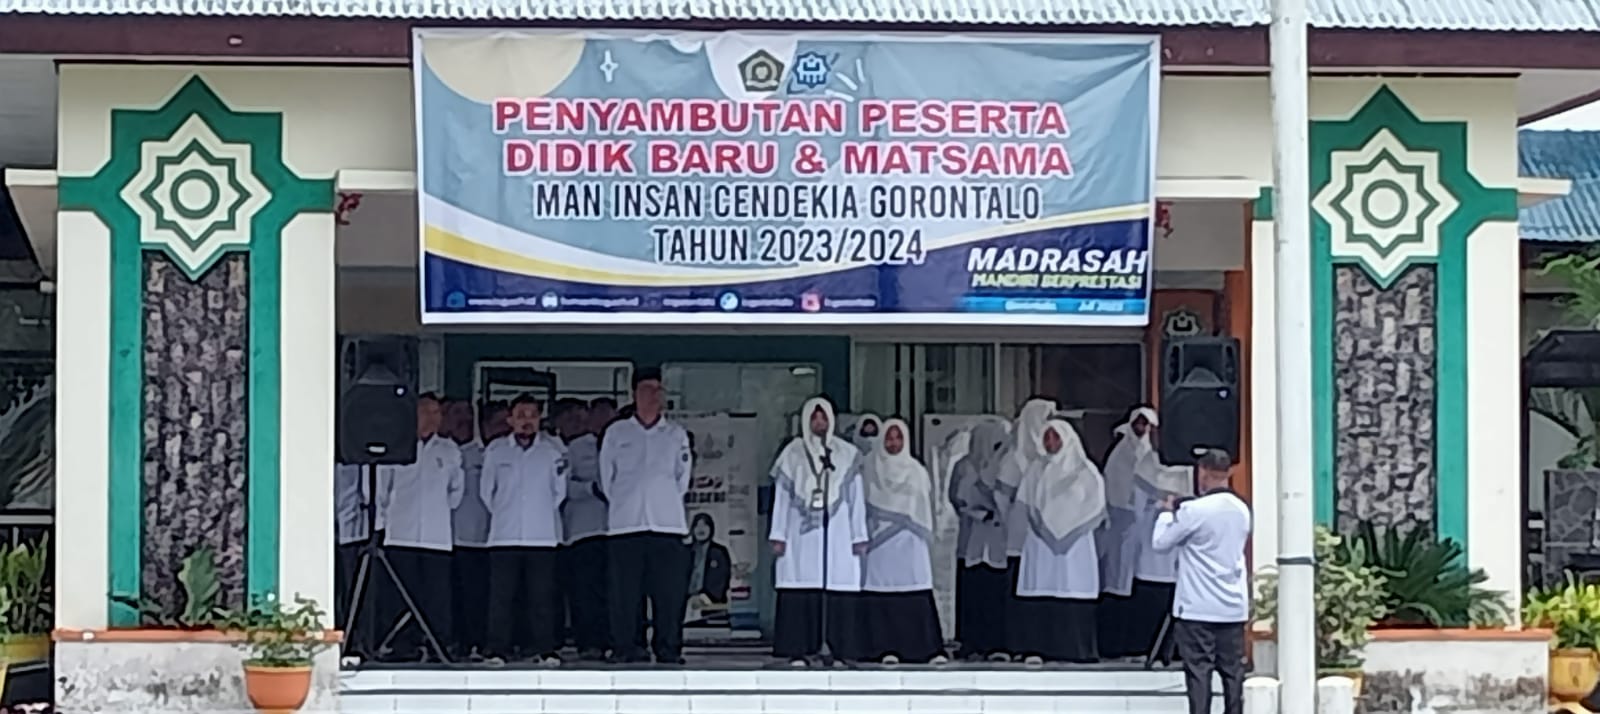 The New Academic Year of 2023/2024 Begins with A Flag Ceremony at MAN IC Gorontalo